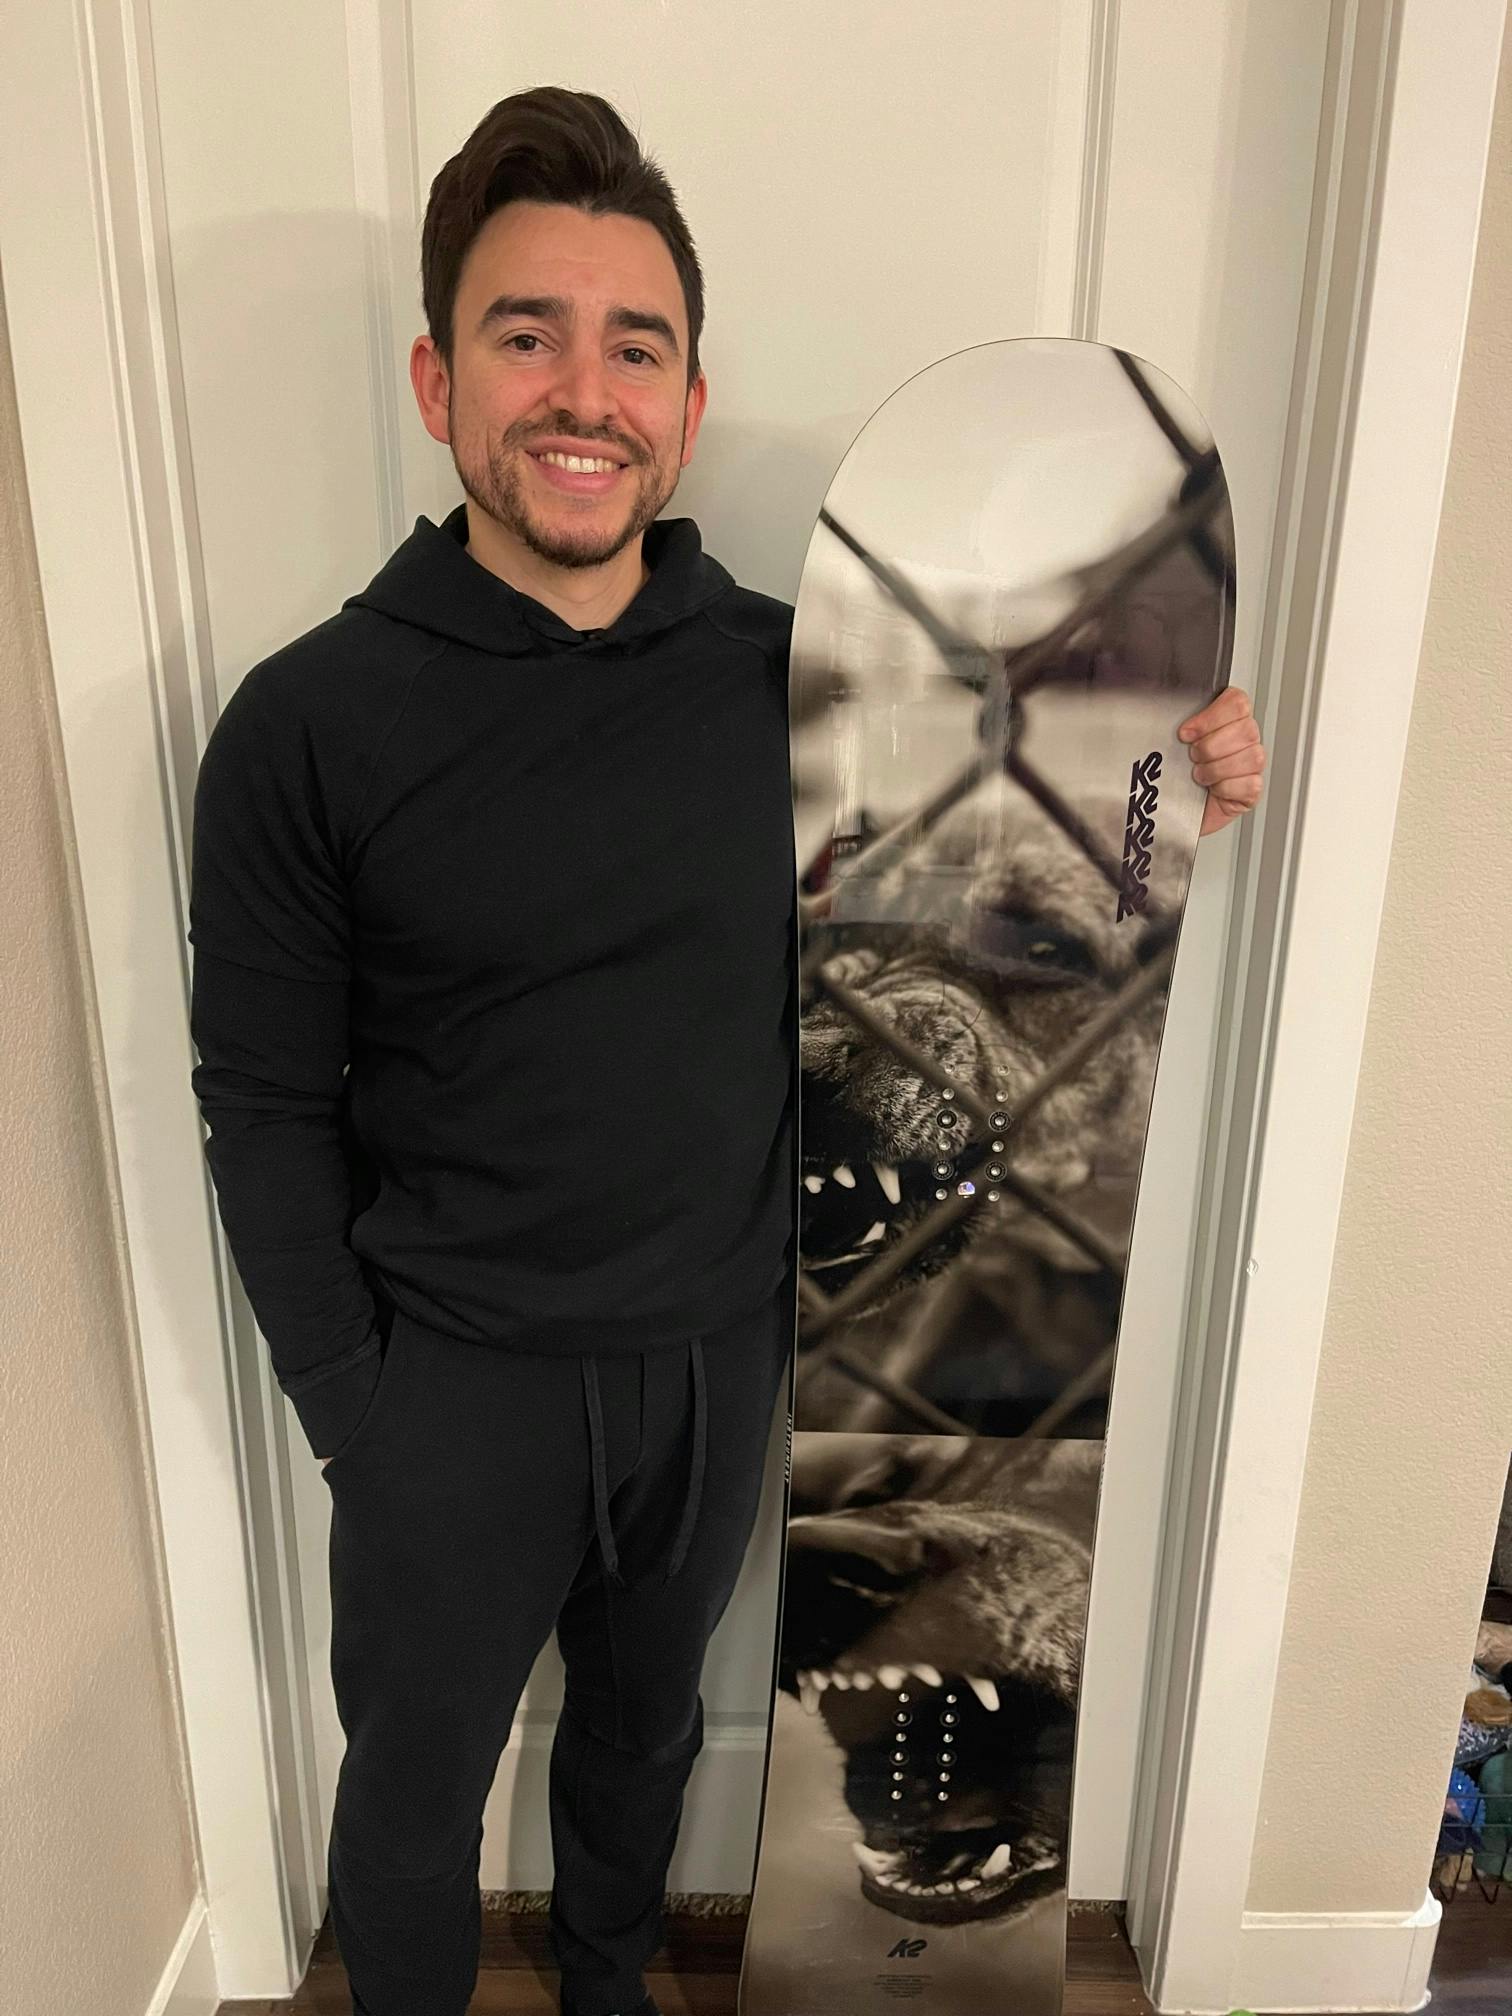 A man standing with the K2 Instrument Snowboard.